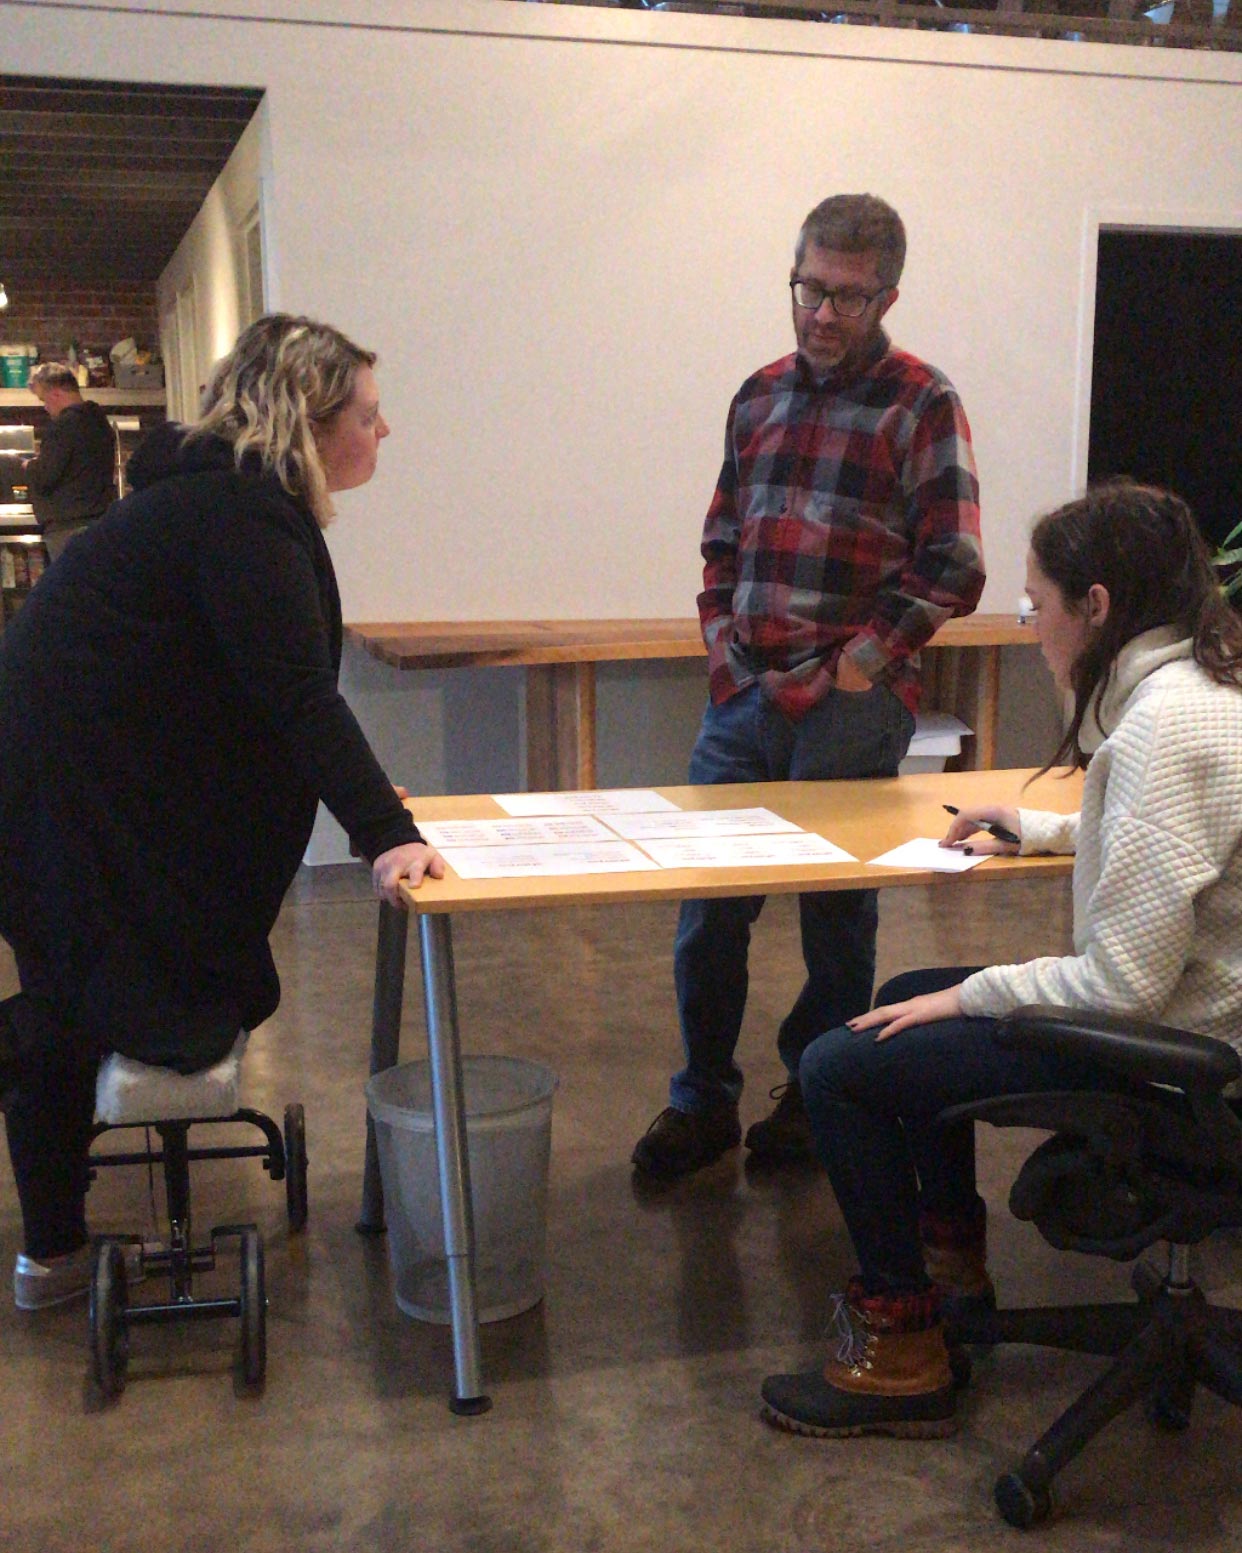 The Atomicdust creative gathers to discuss a website design project